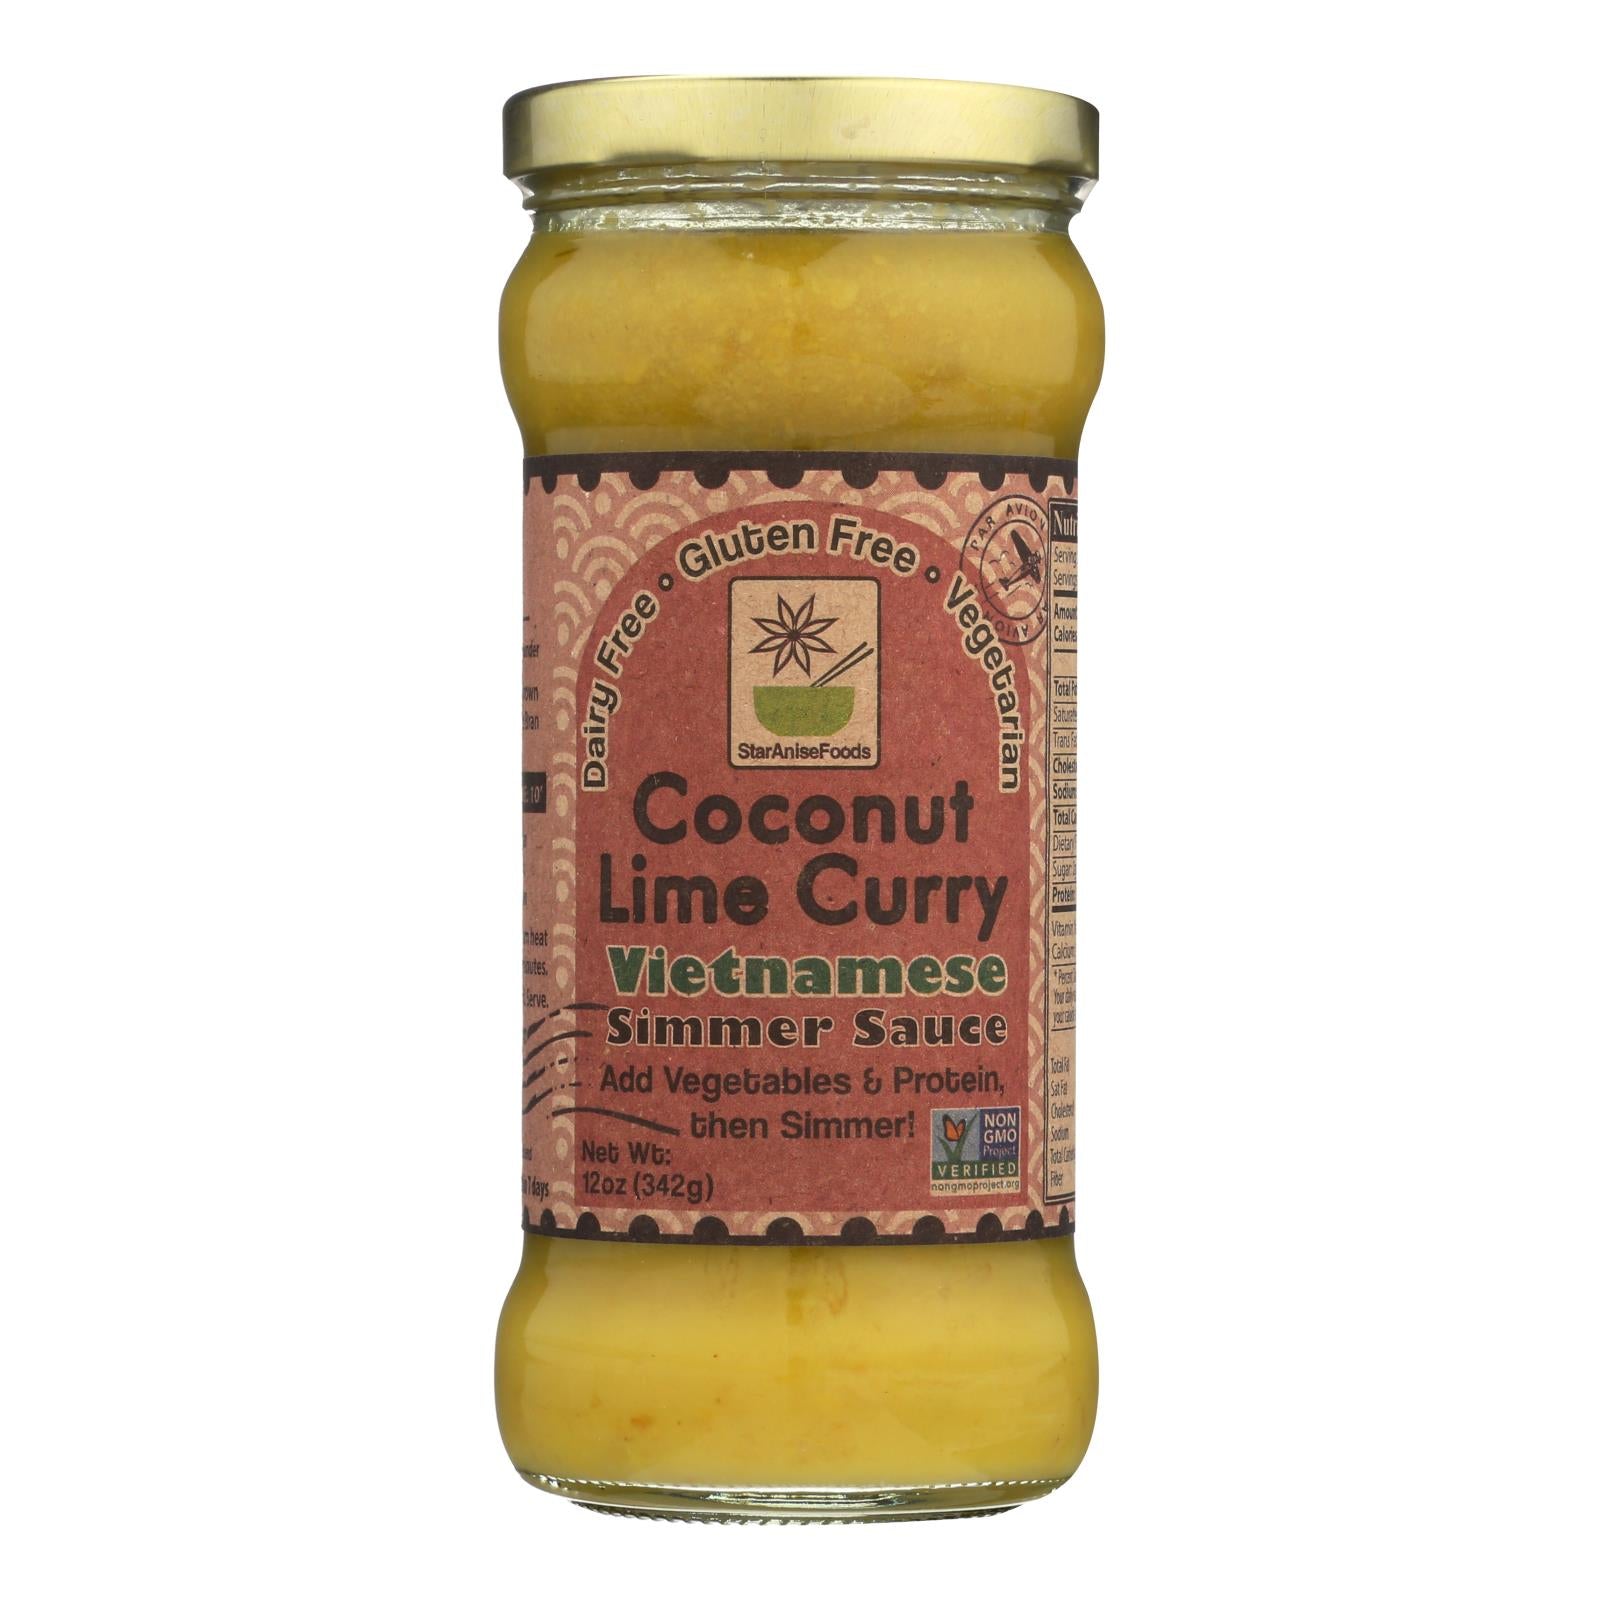 Star Anise Foods Coconut Lime Curry Vietnamese Simmer Sauce - Case Of 6 - 12 Oz